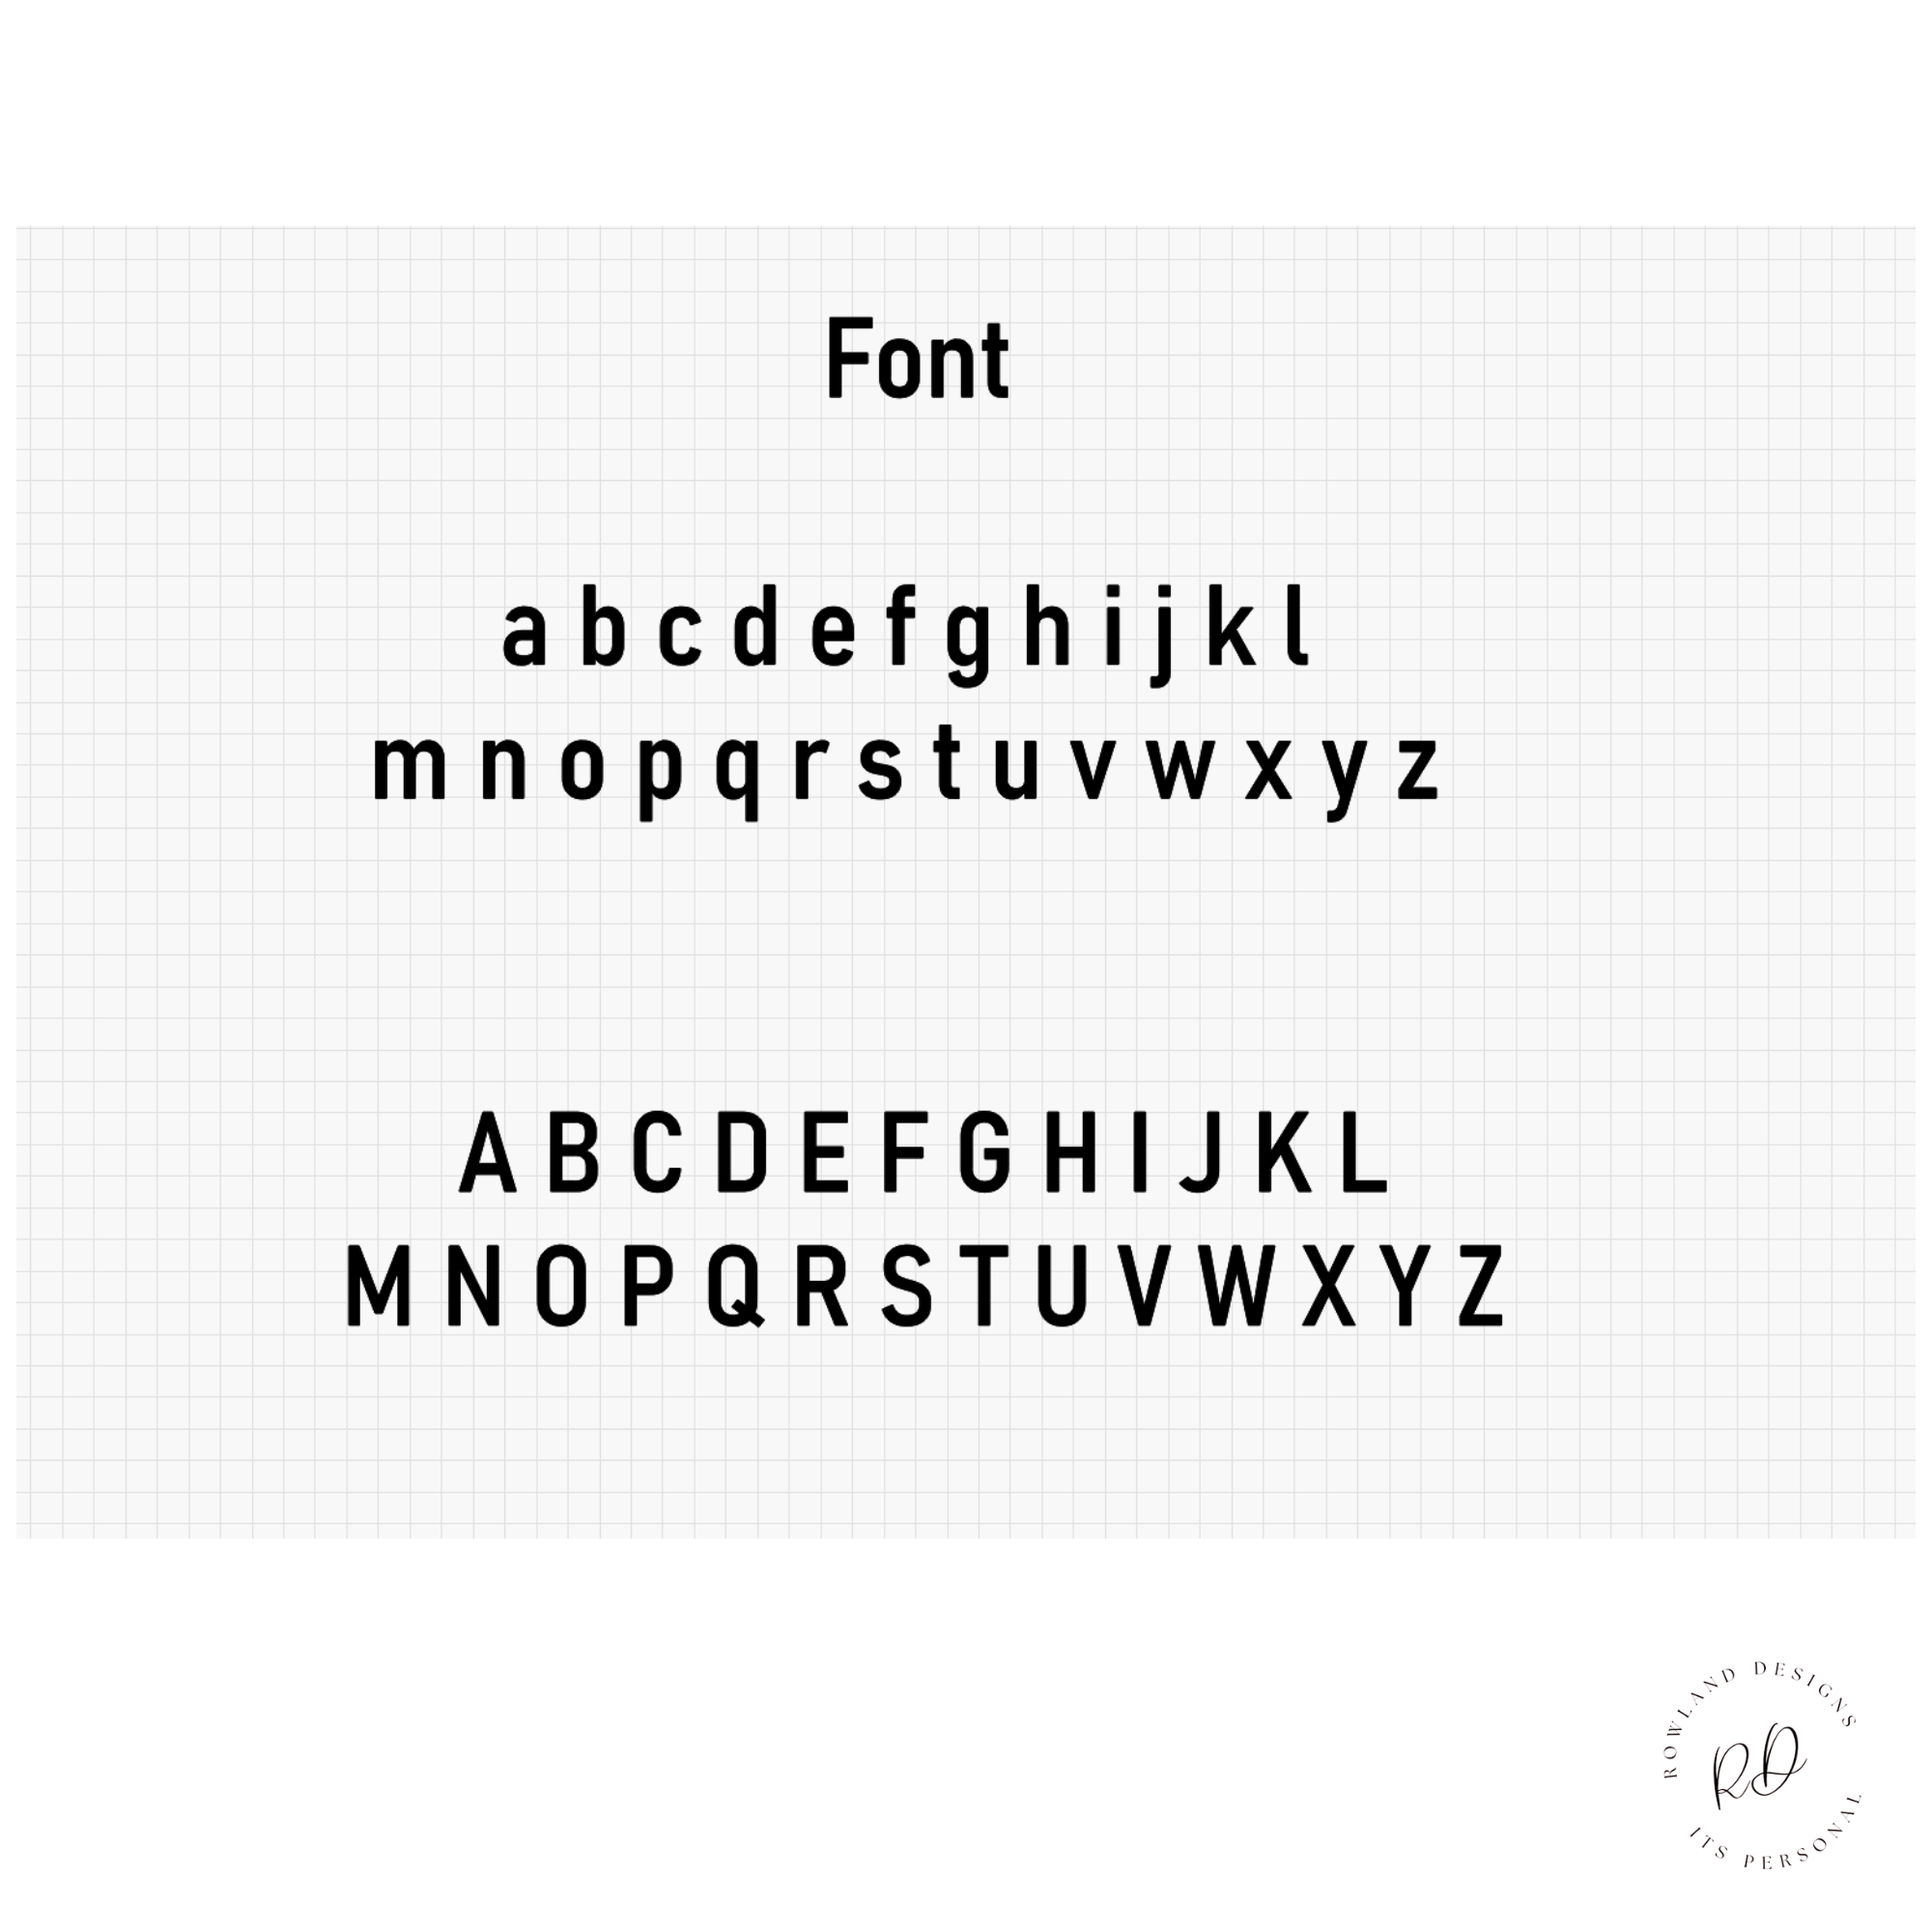 This is the font, its a easy to read standard font. 